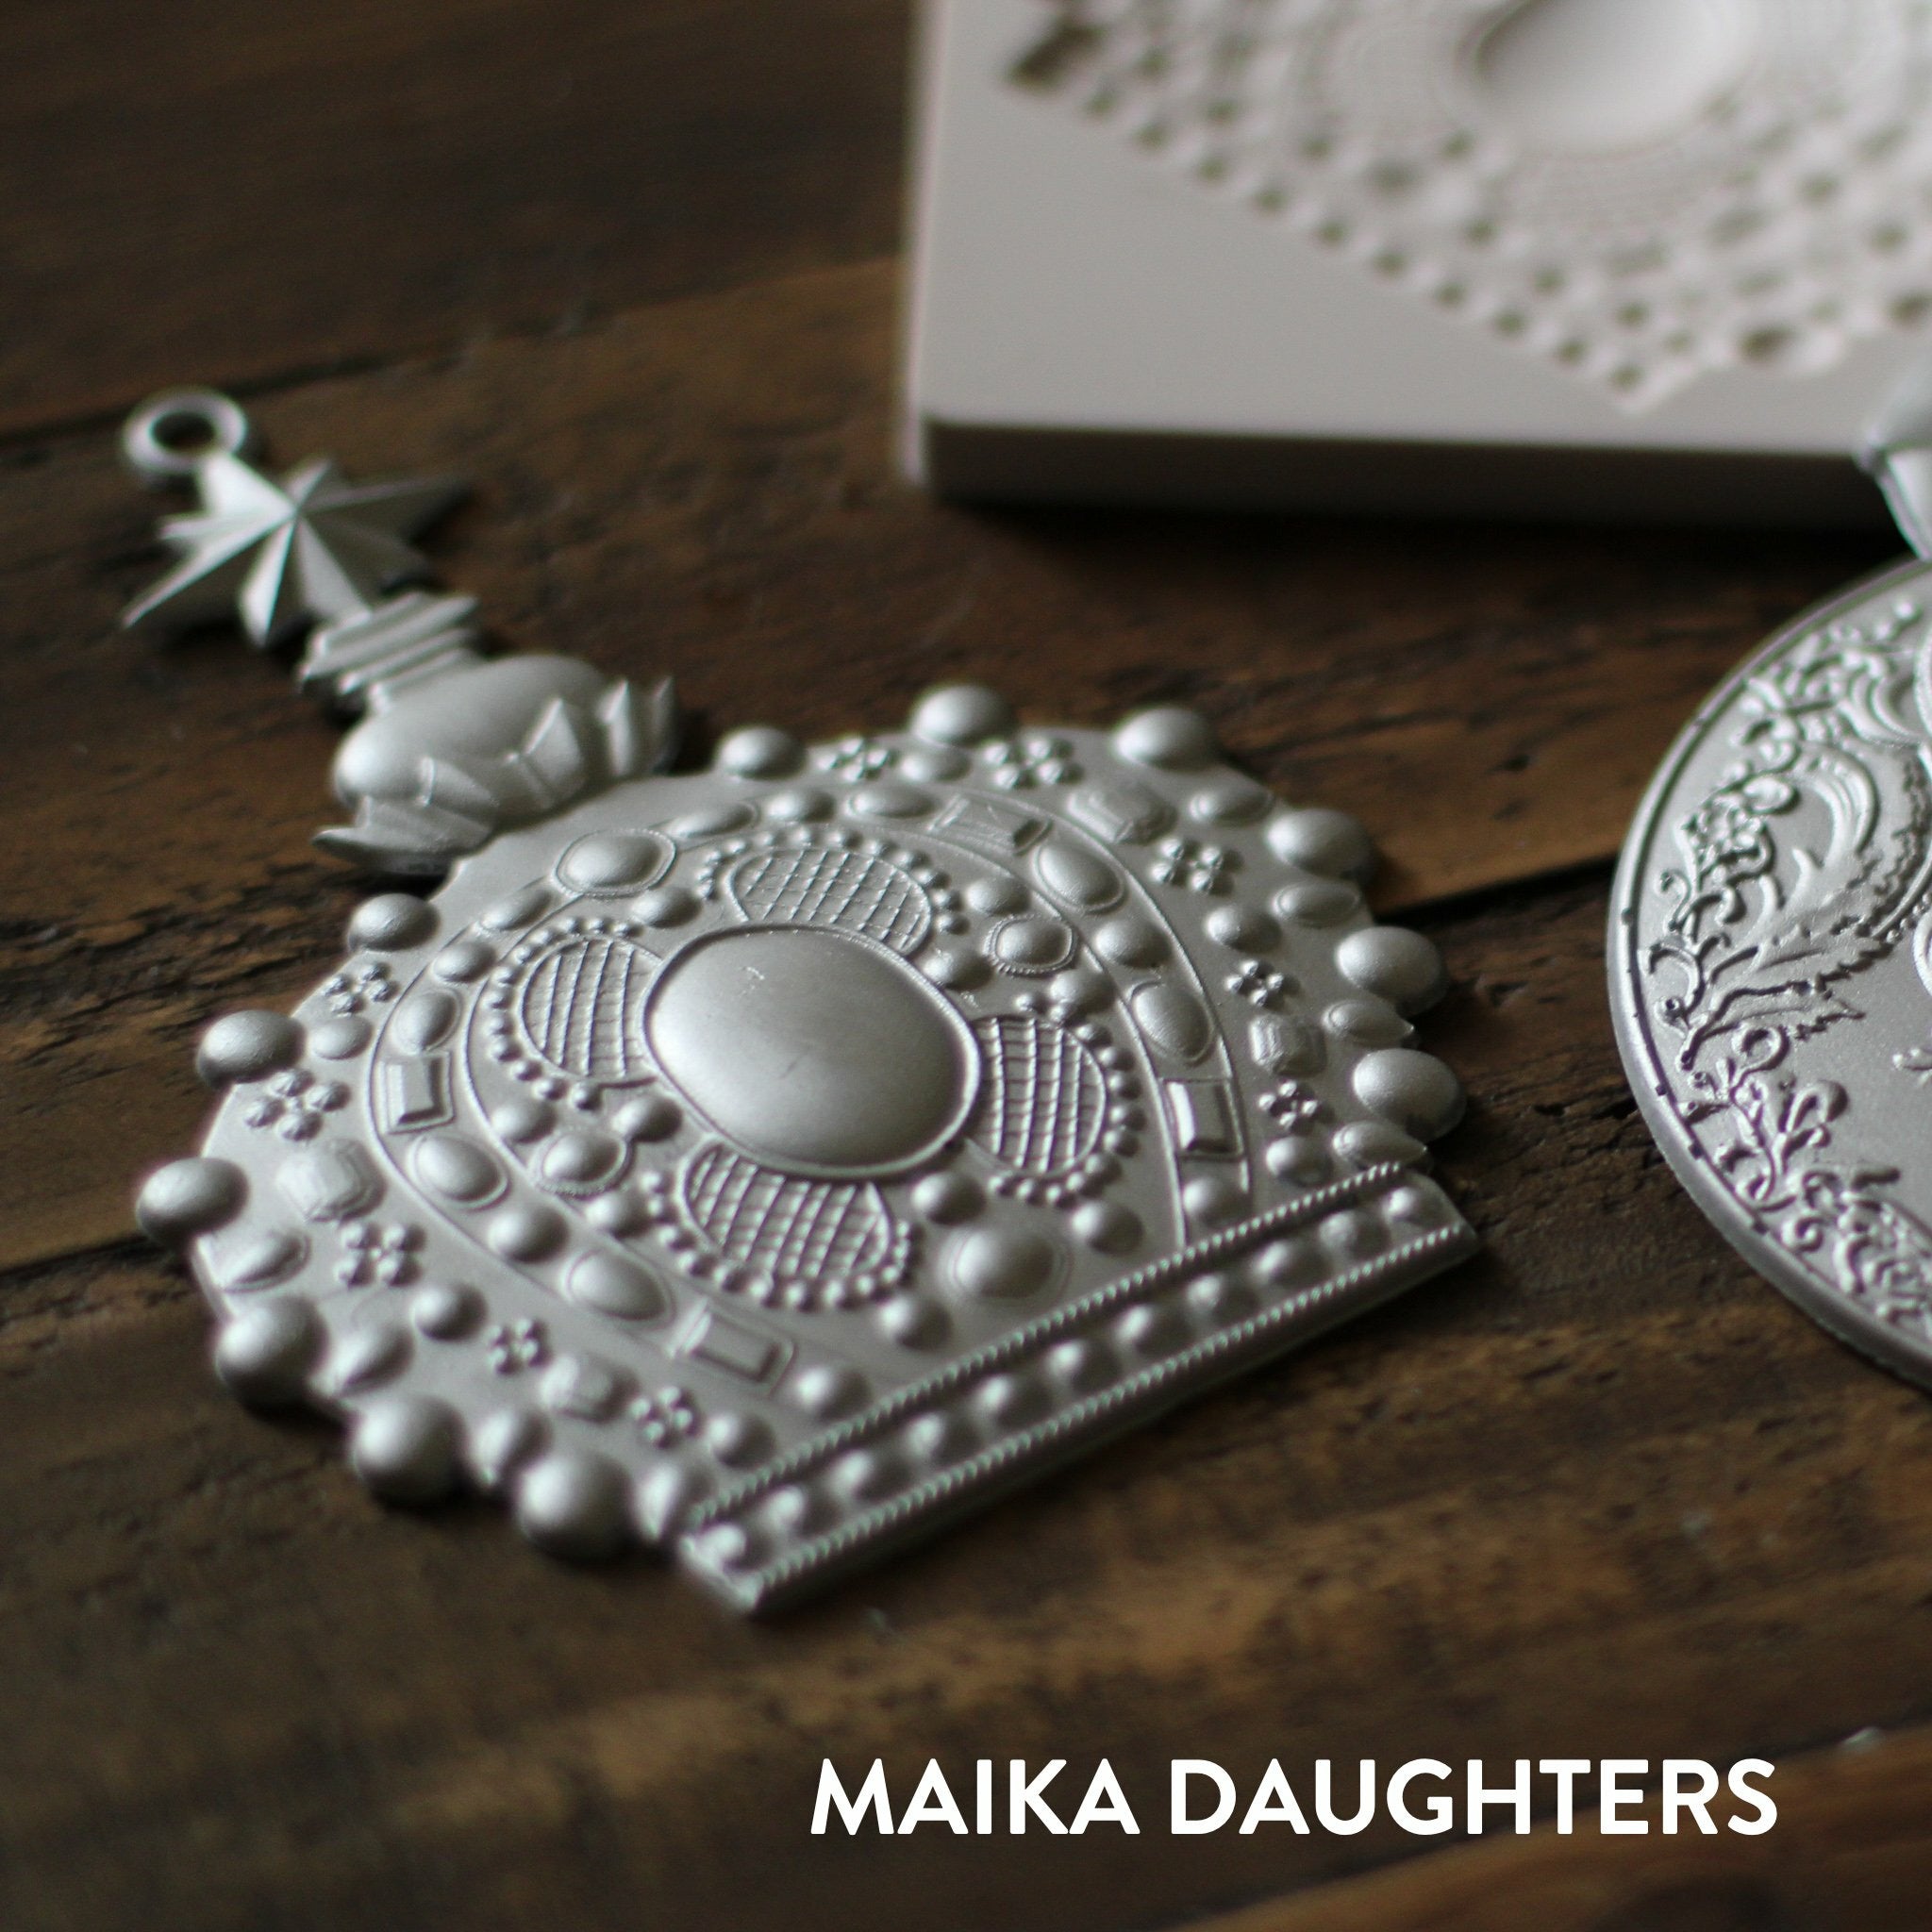 Wooden background with a angled view of the victorian adornments castings painted in a metallic silver. A white Maika Daughters logo is in the bottom right corner.